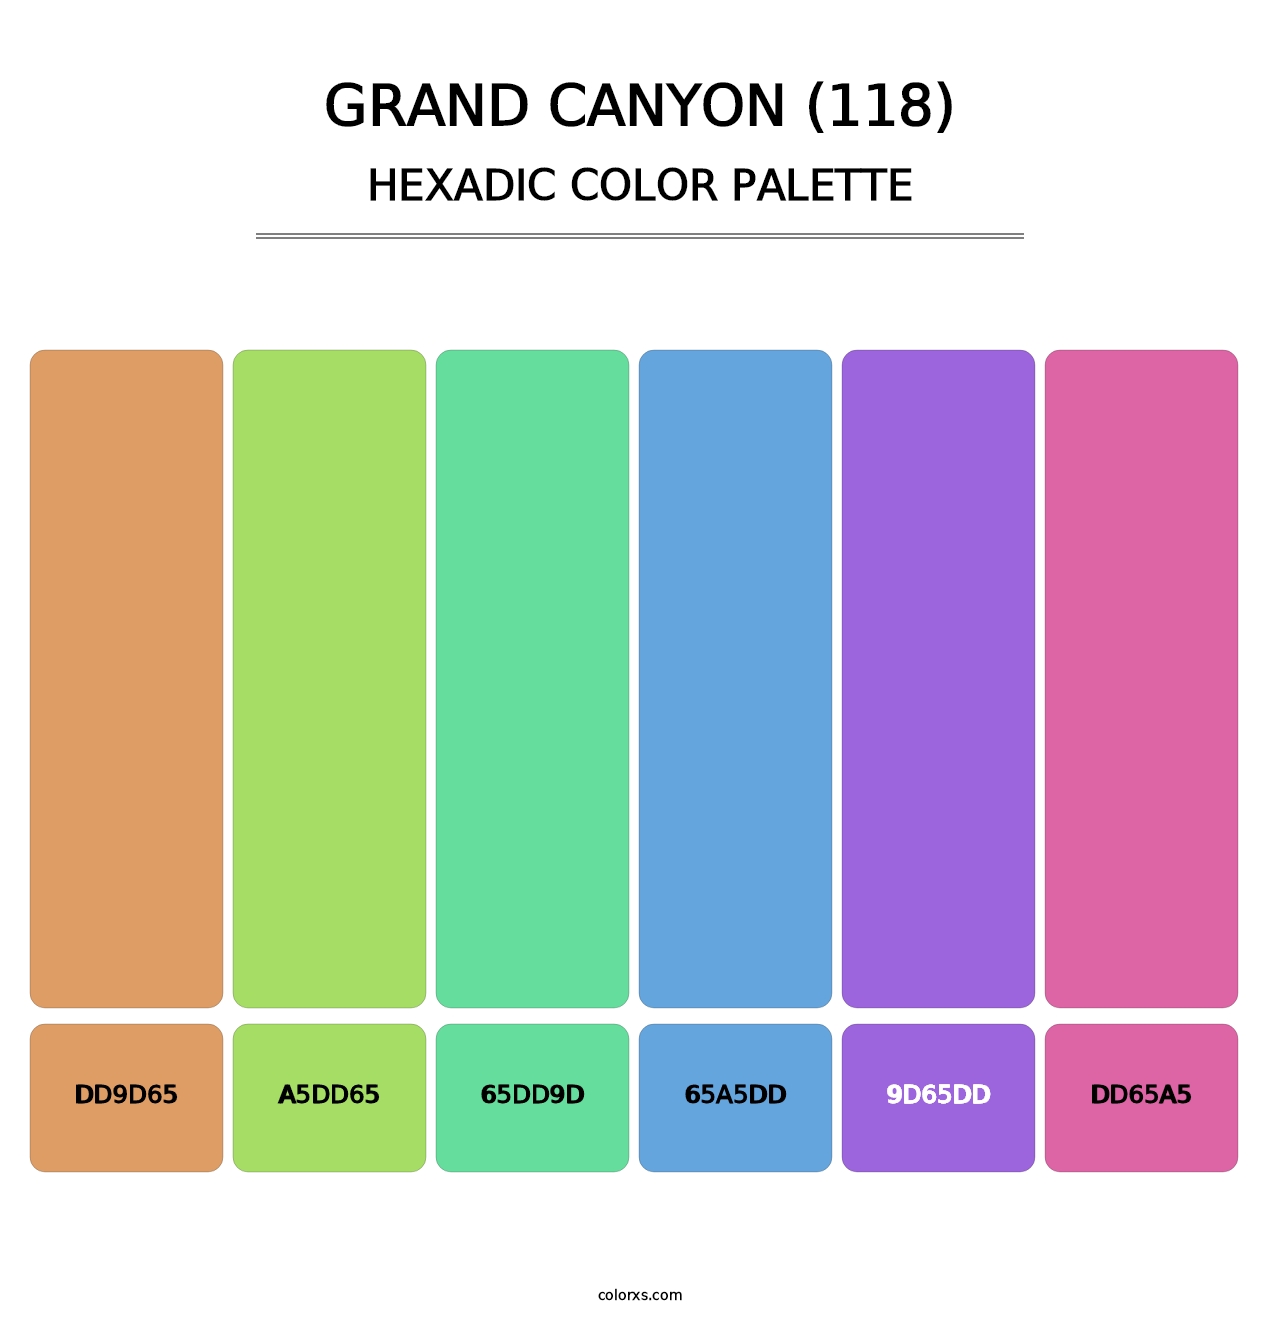 Grand Canyon (118) - Hexadic Color Palette